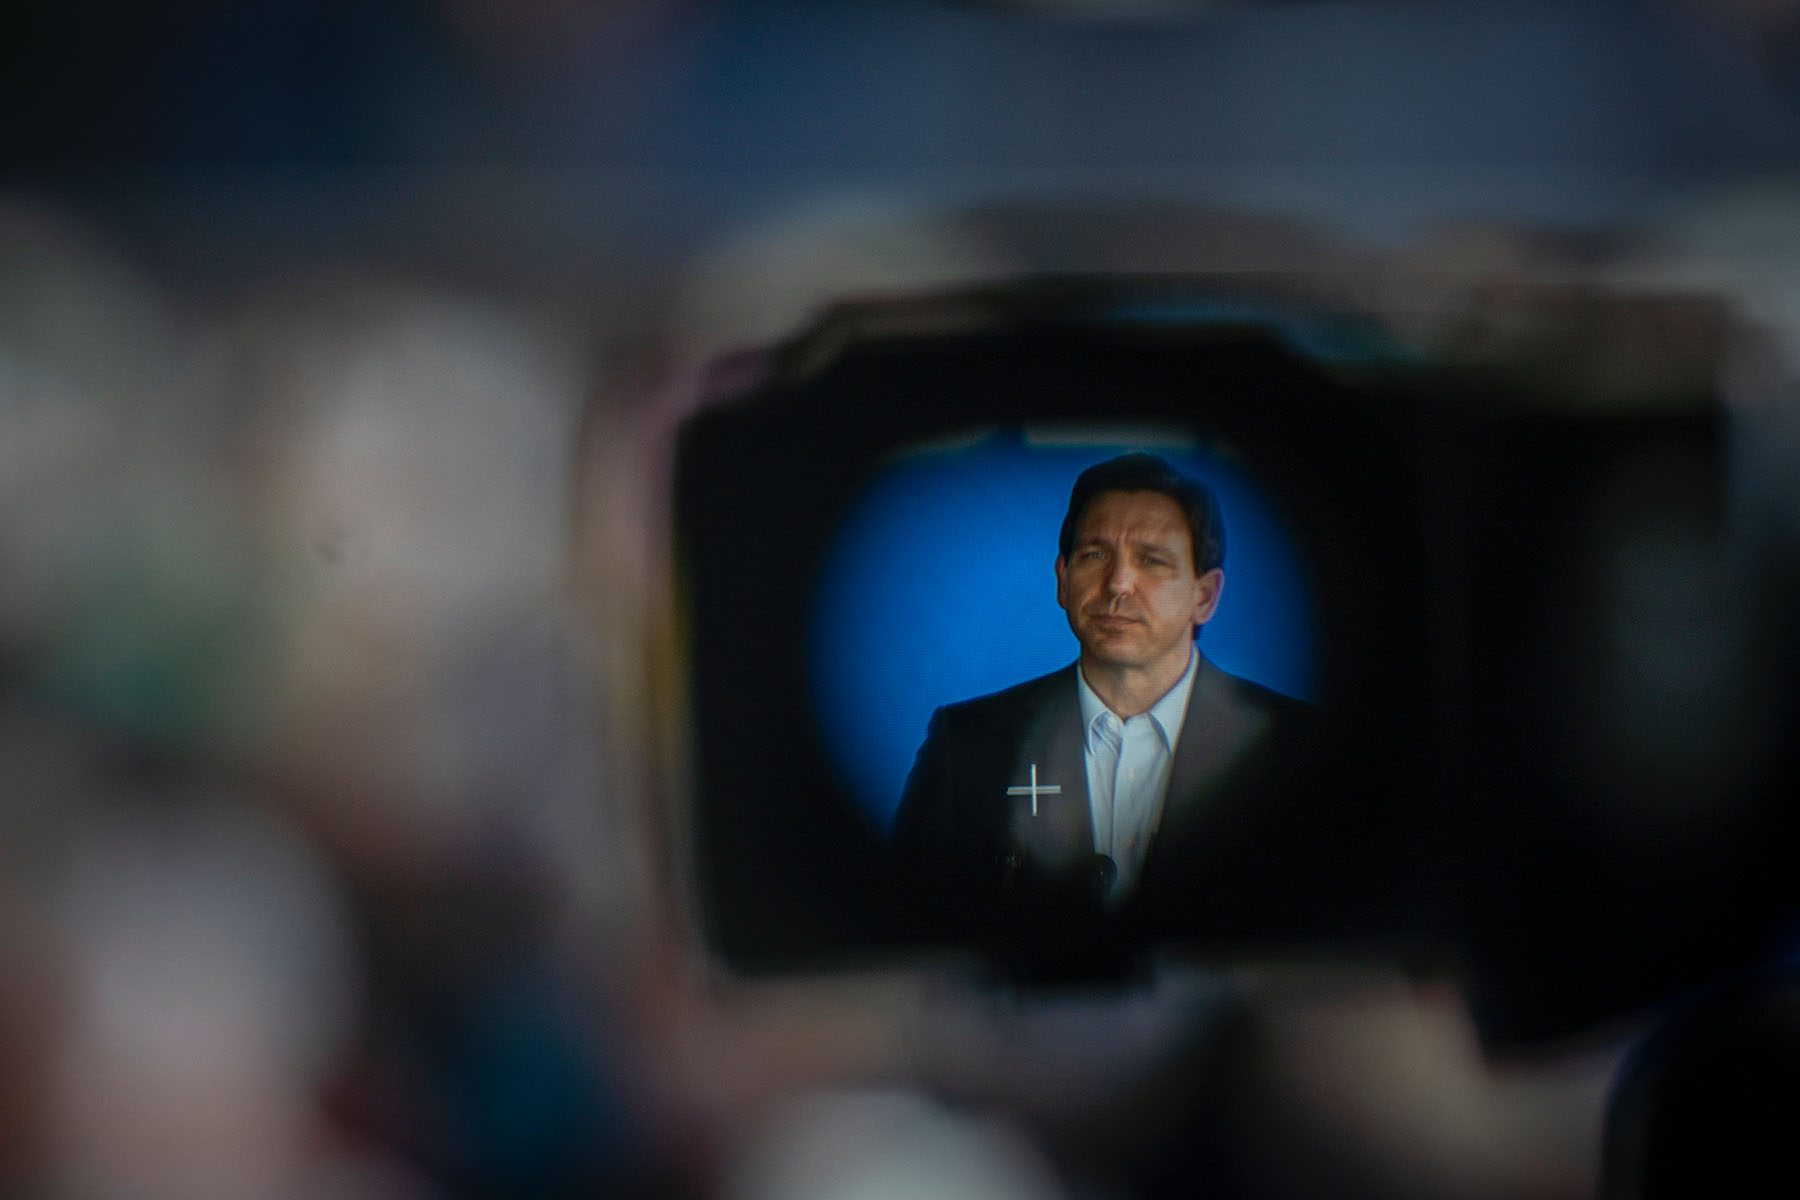 Gov. Ron DeSantis, seen through a TV camera eyepiece, holds a rally in Pinellas Park, Florida in March 2023.